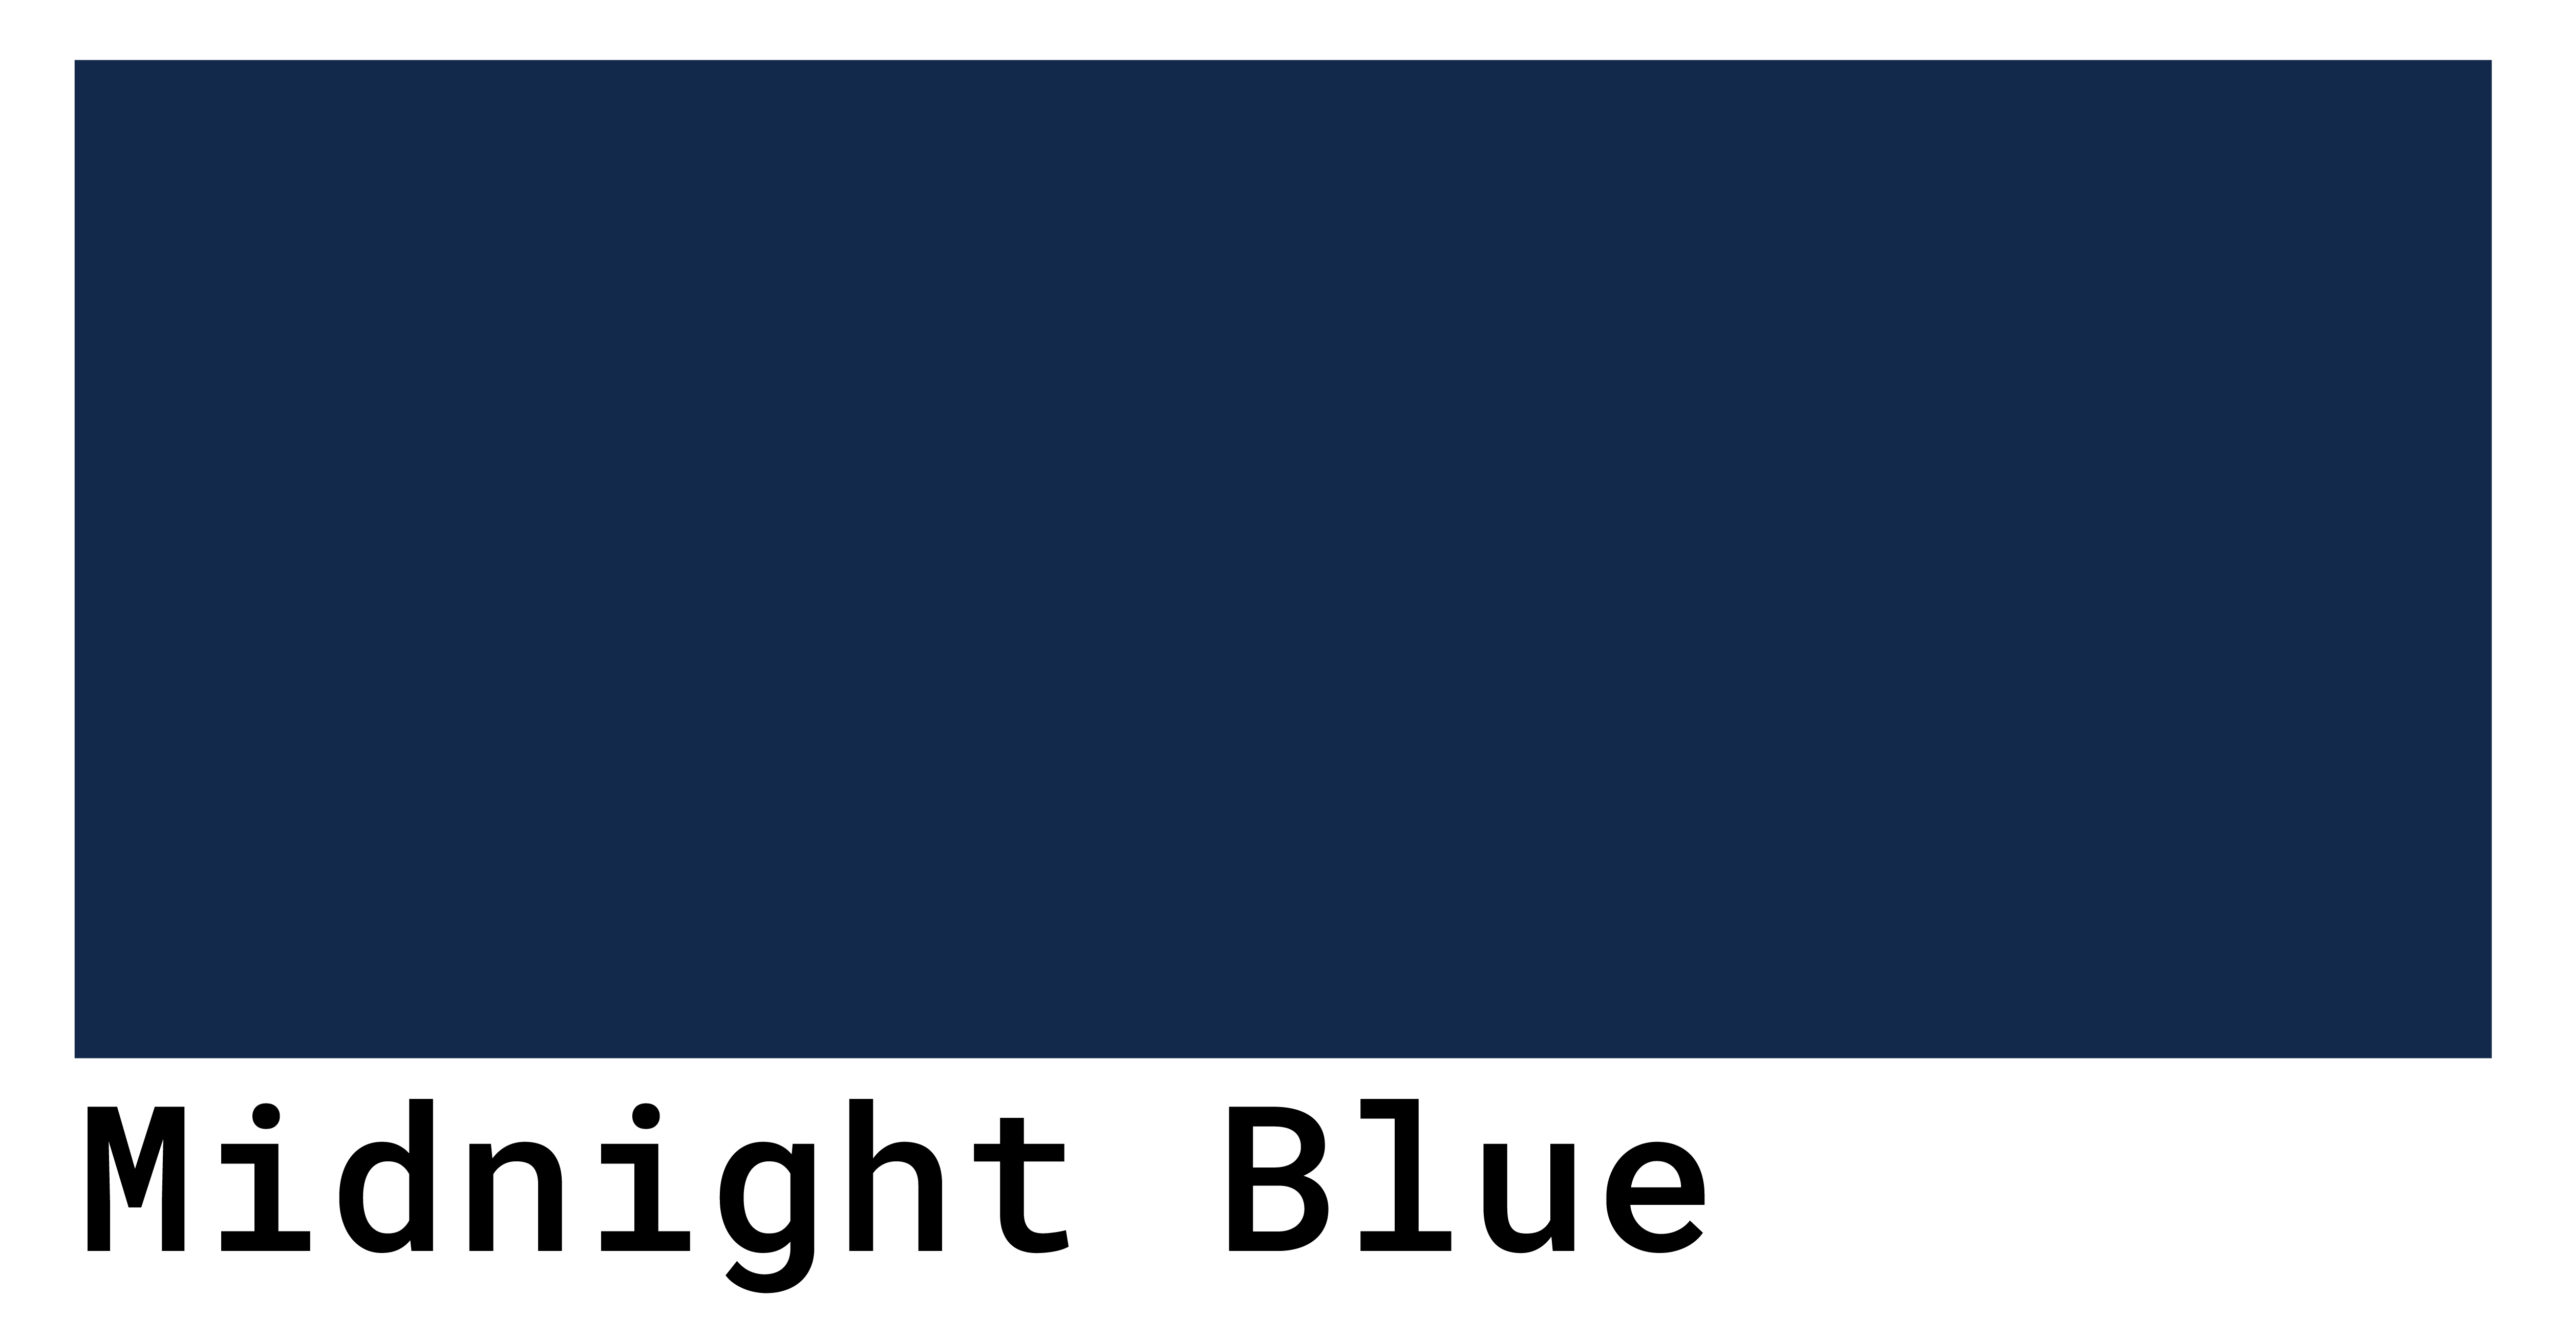 midnight blue color swatch scaled